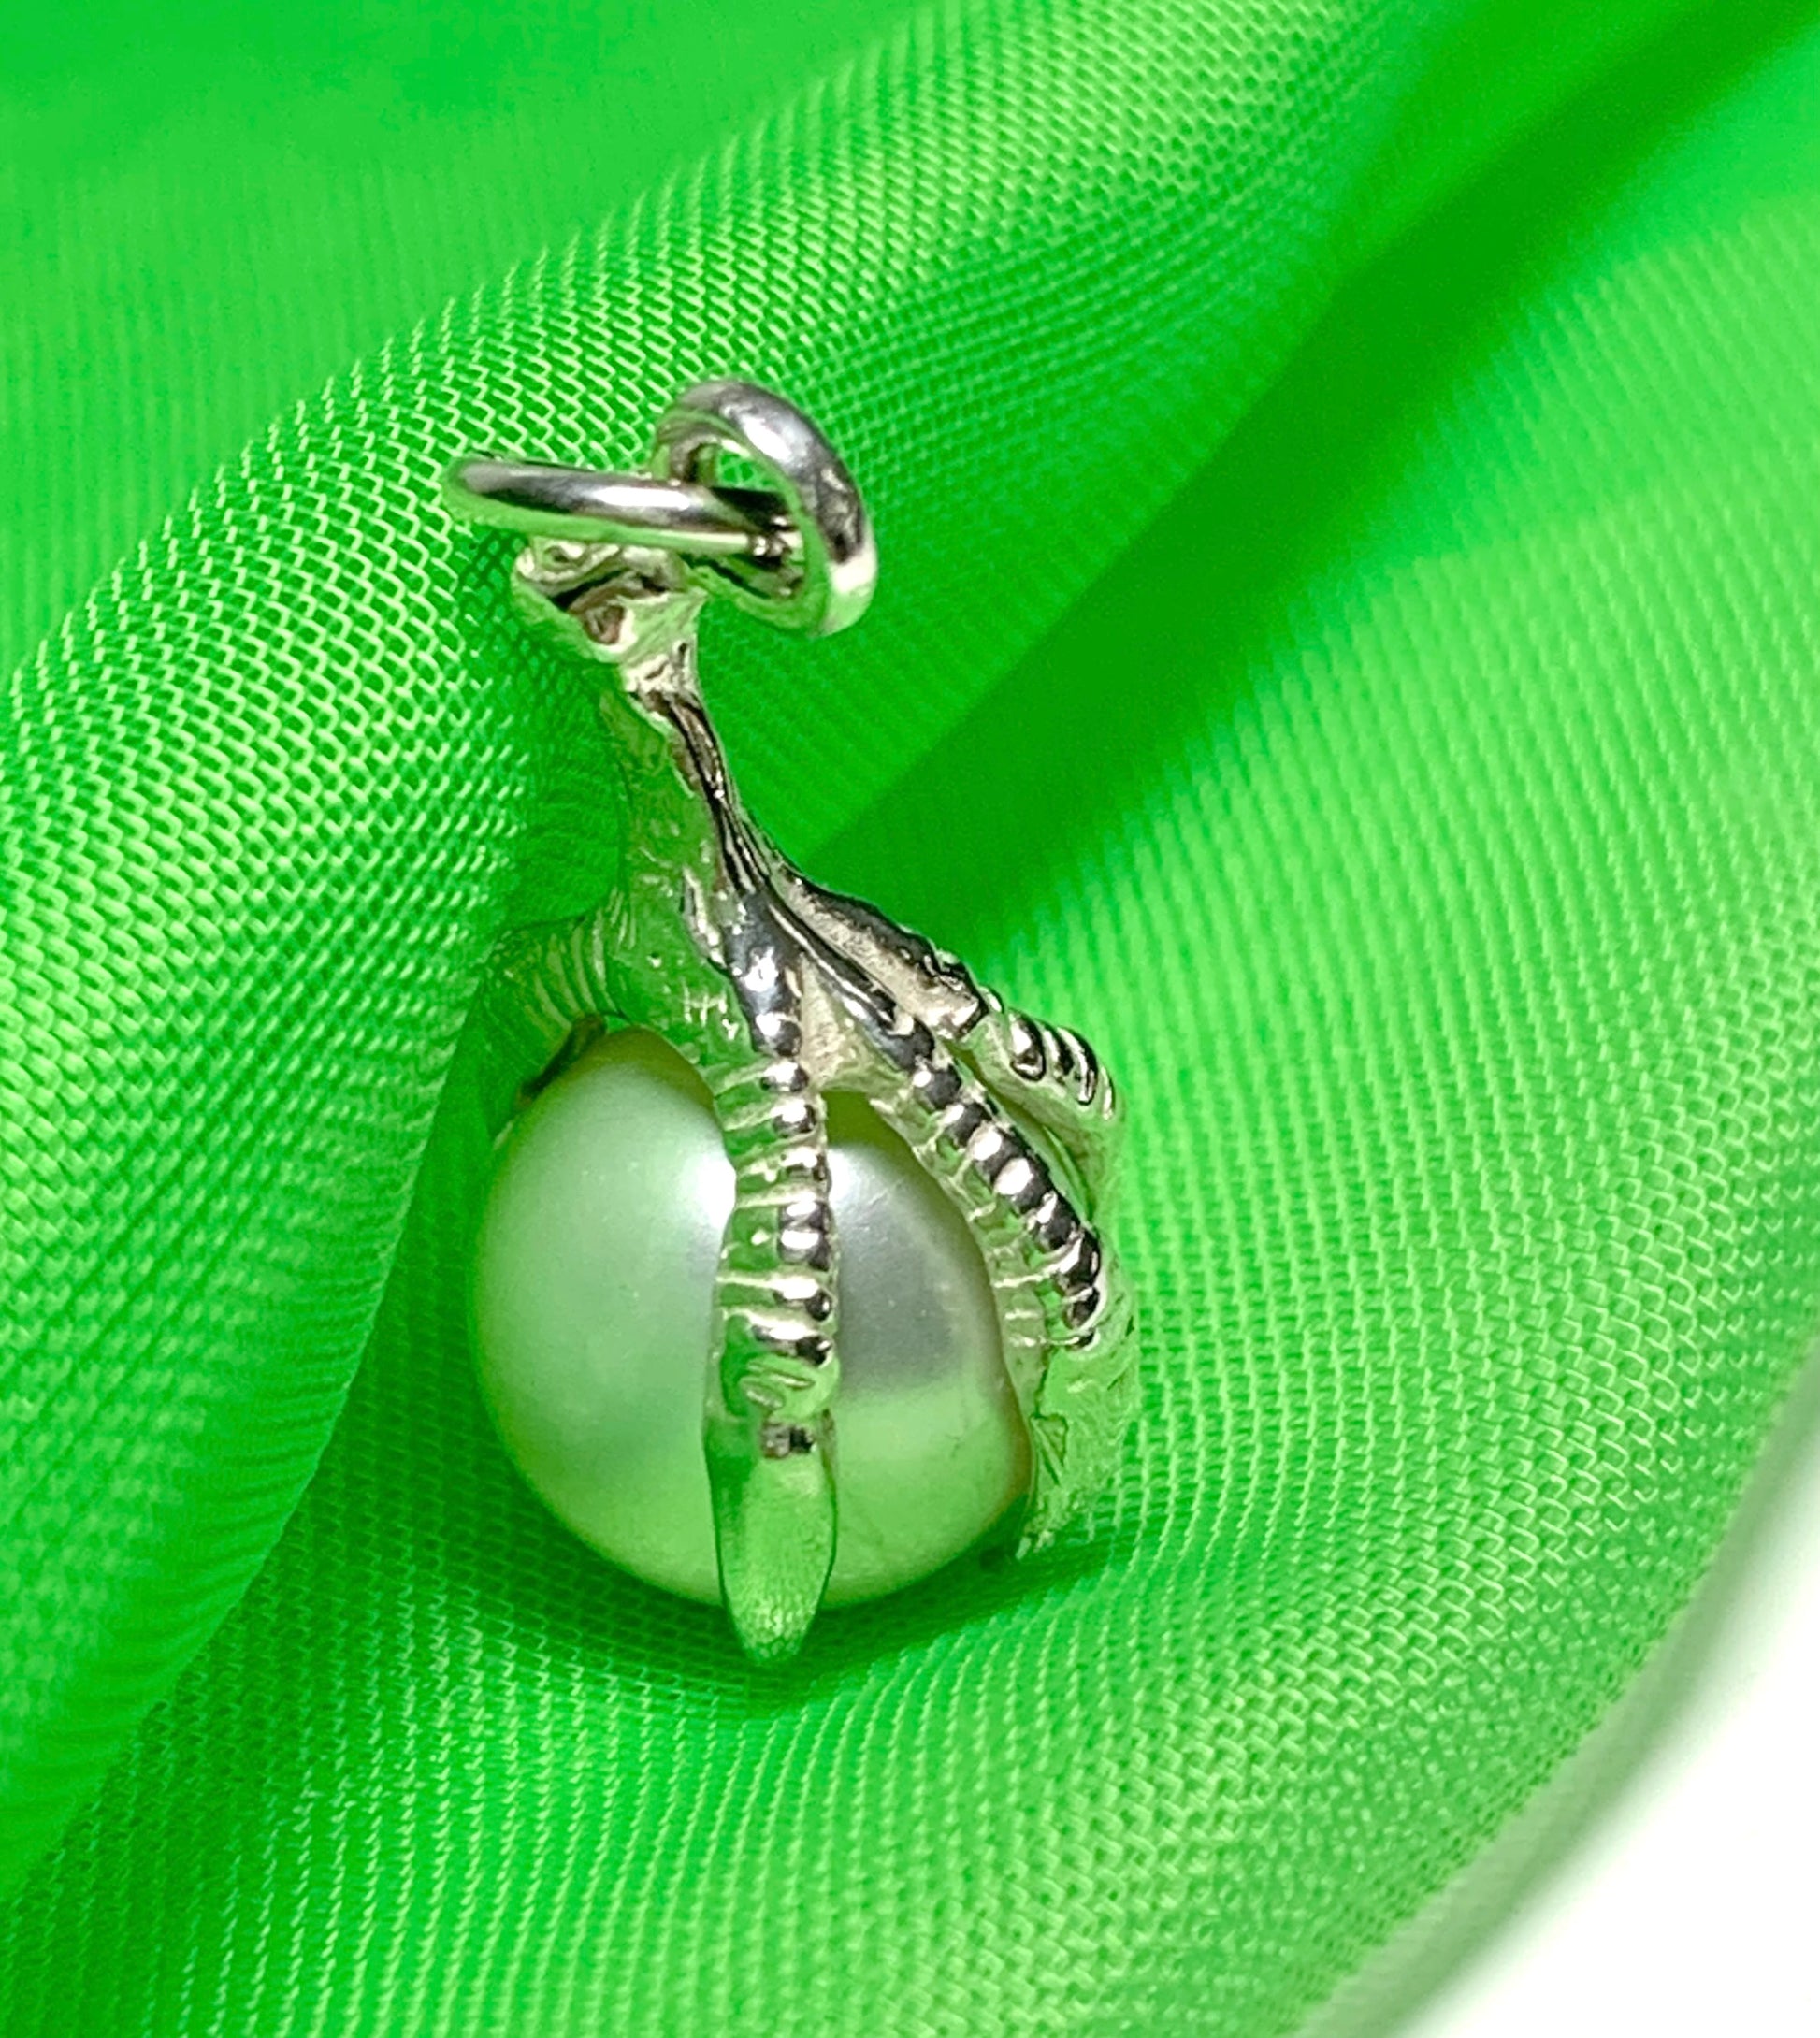 Bird of Prey talon hooked claw real freshwater pearl charm silver